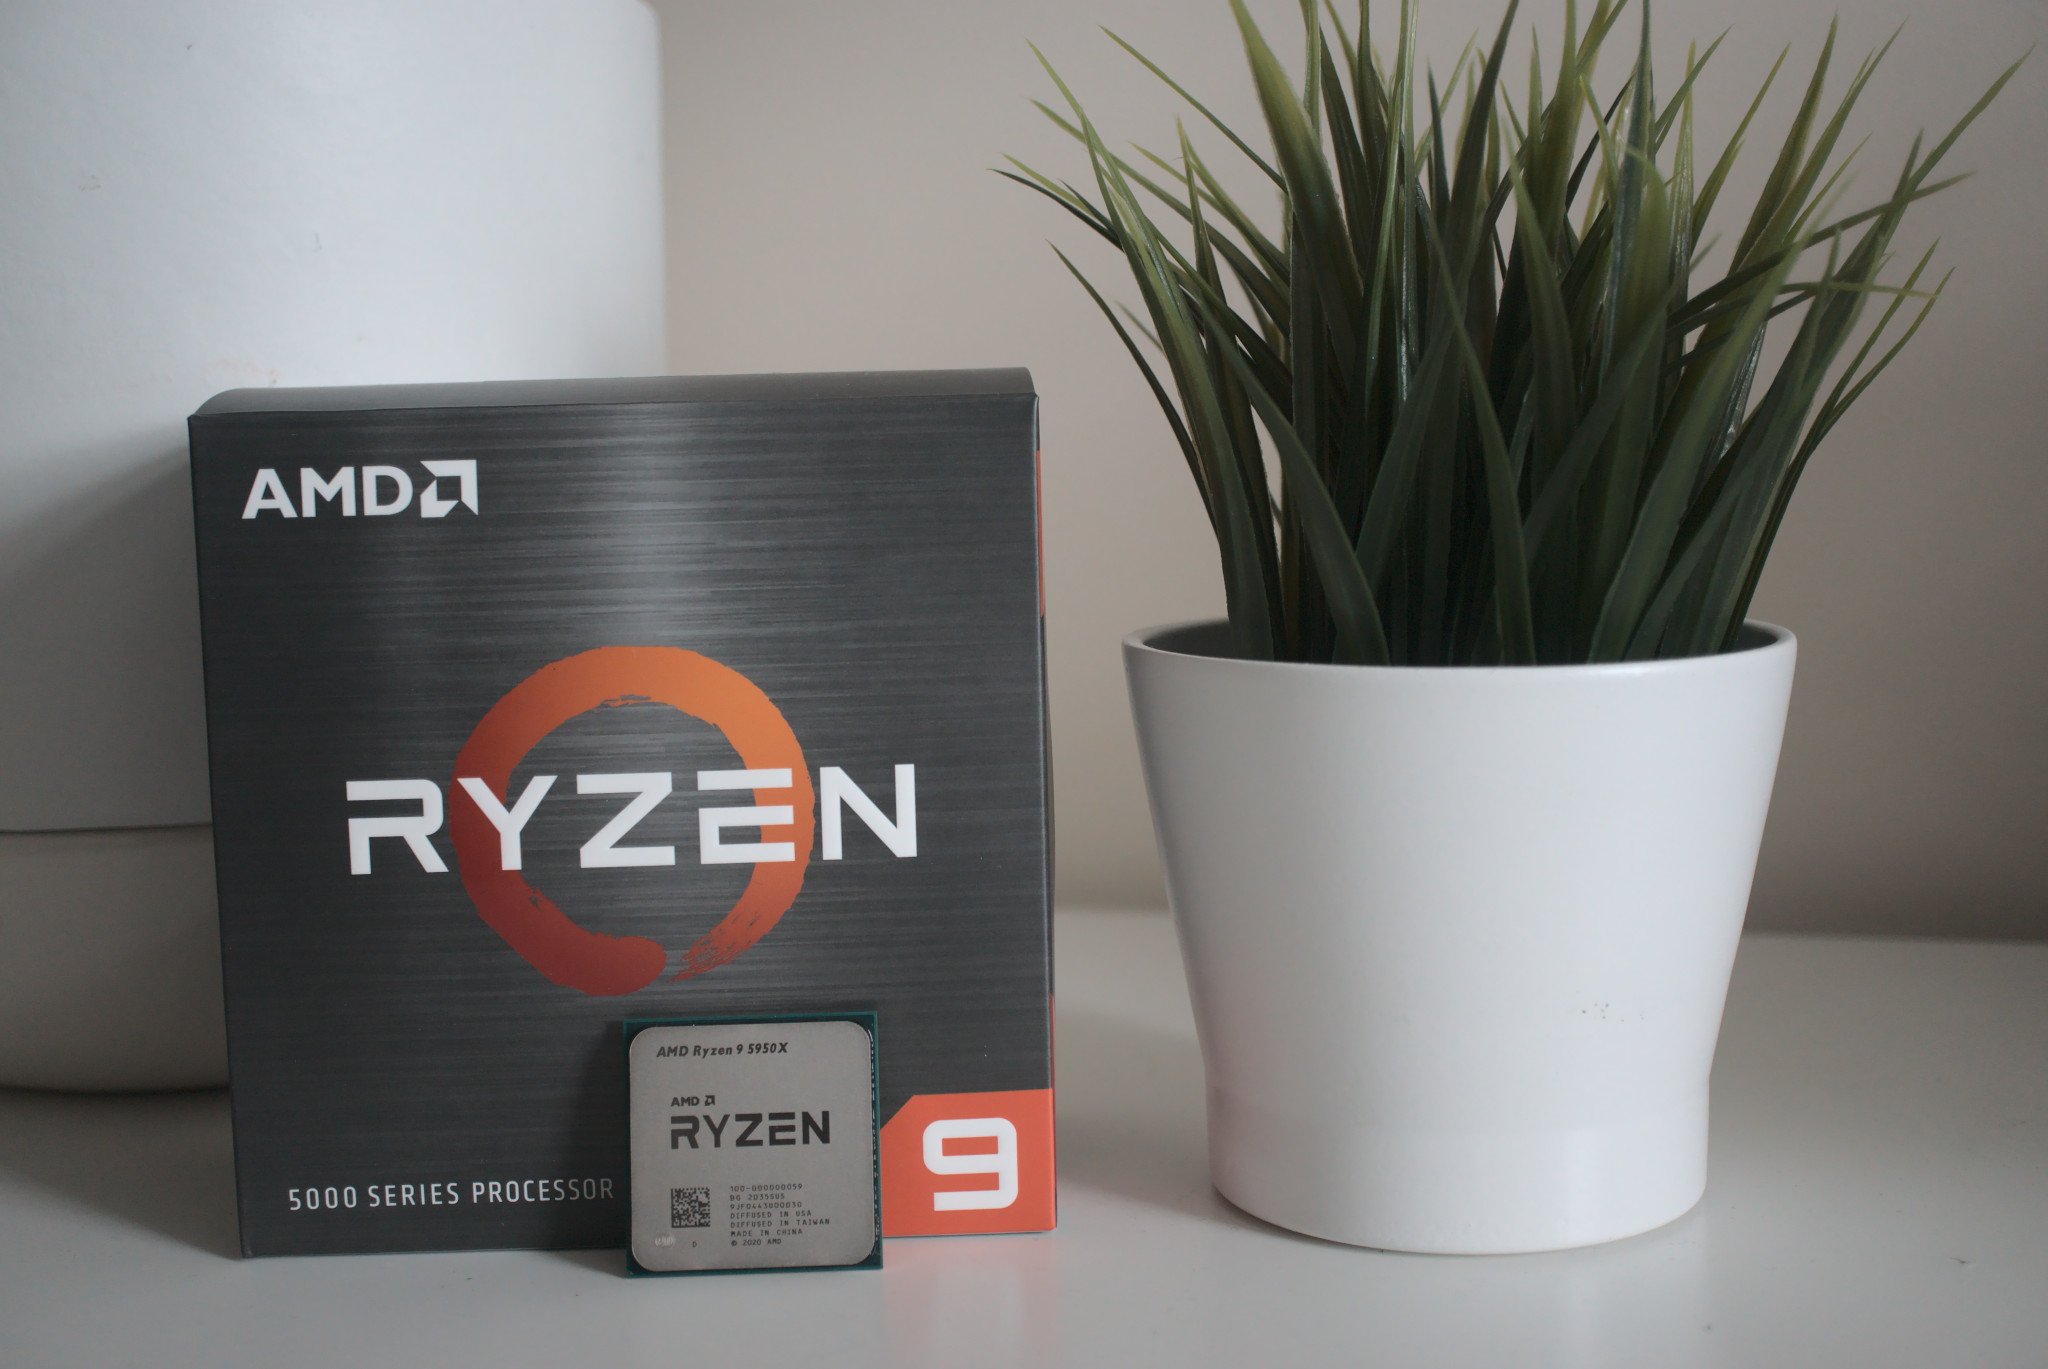 AMD Ryzen 9 5950X review: This monstrous CPU is overkill for gamers and